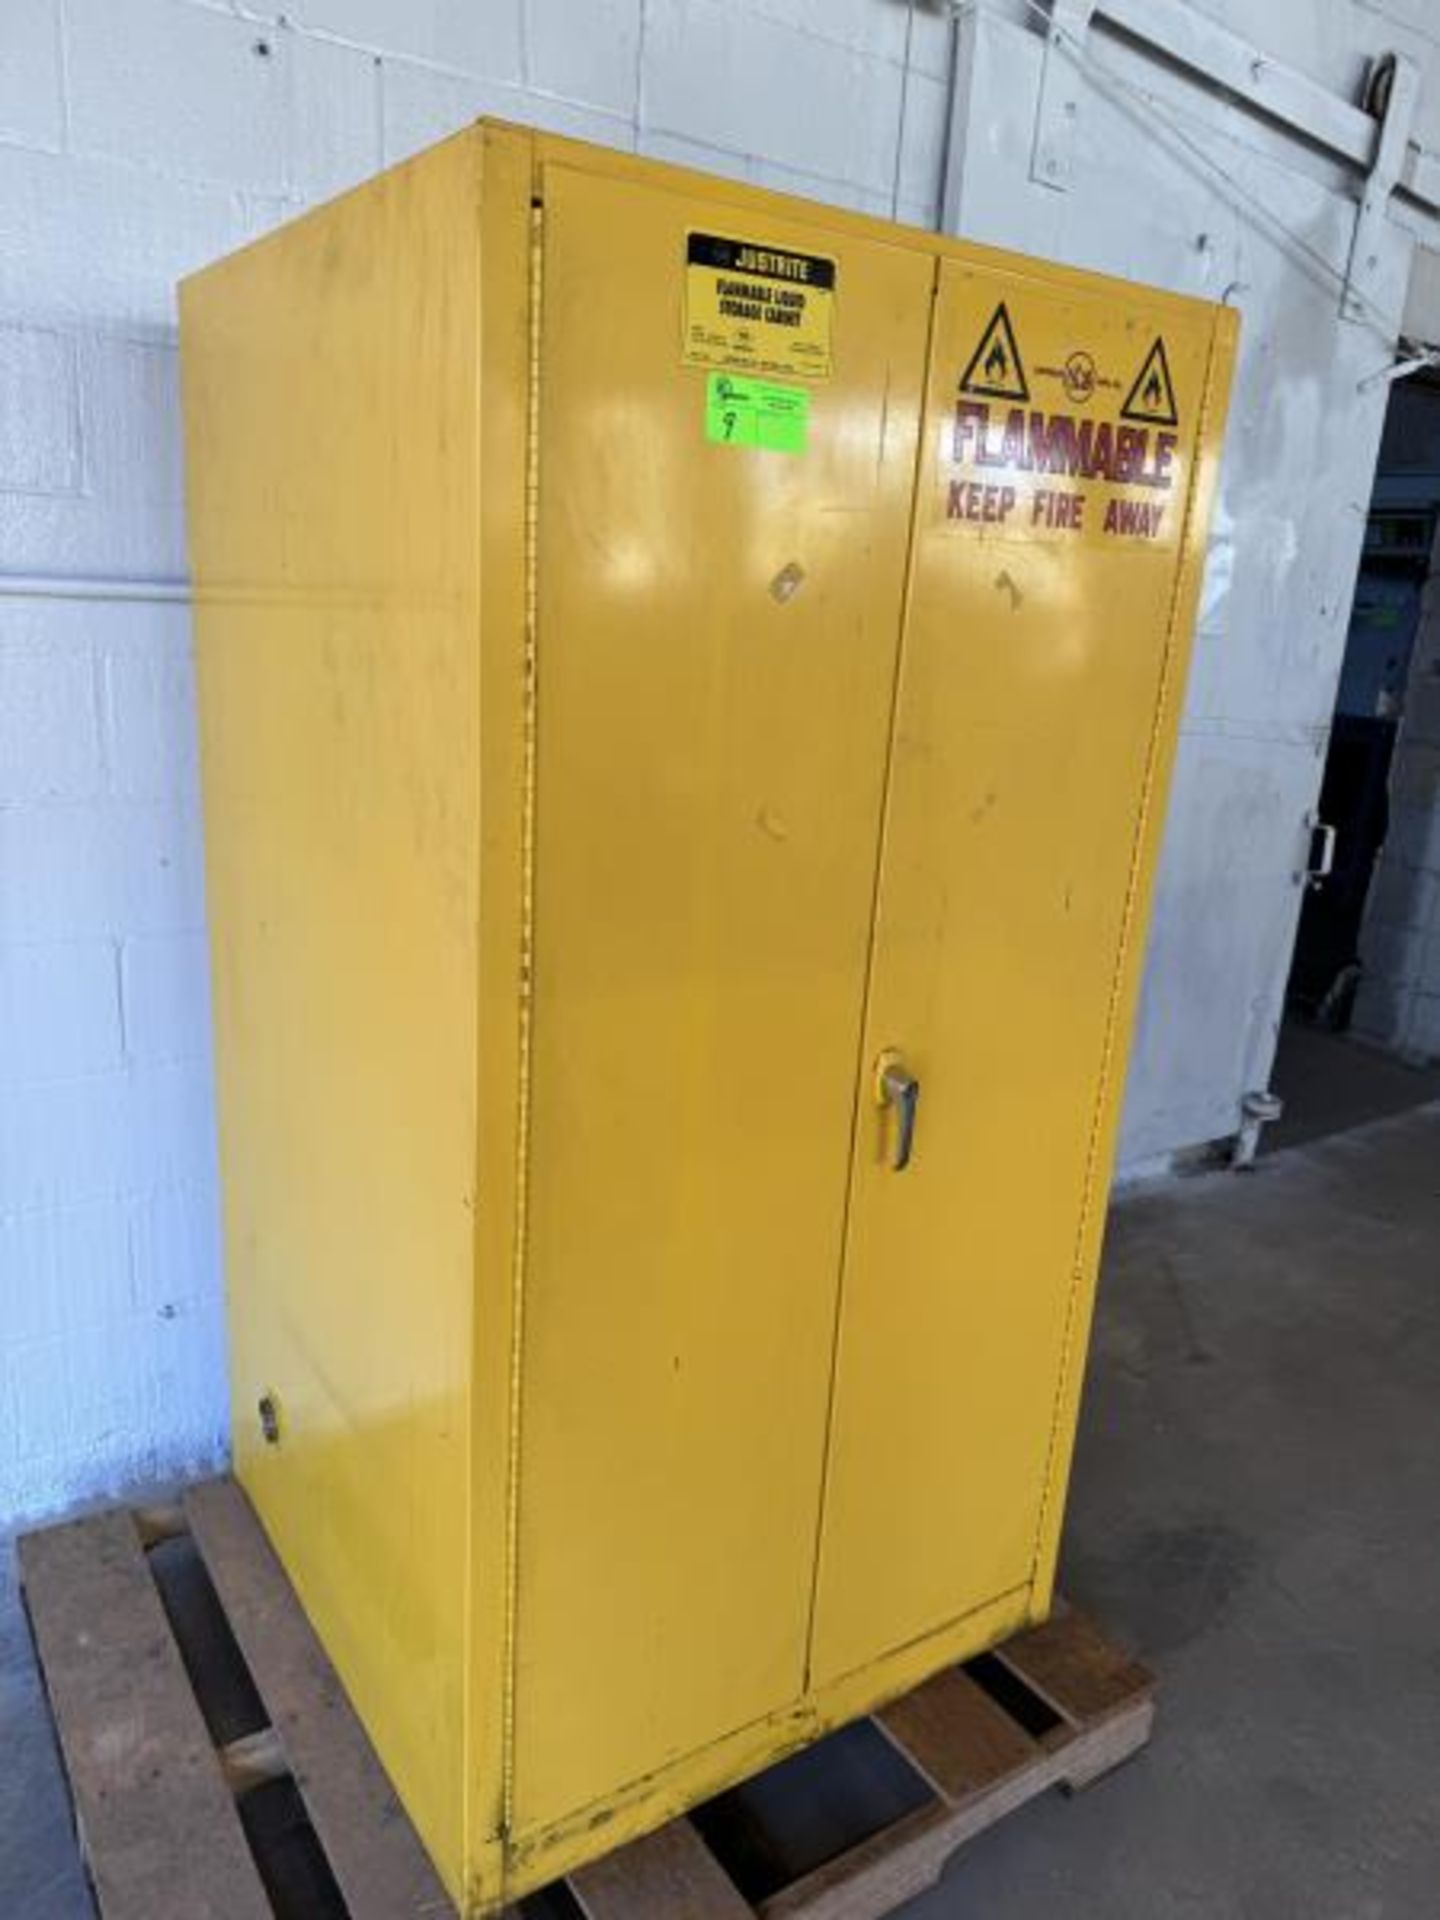 Justrite Flammable Liquid Storage Cabinet 34" Wide x 34" Deep x 66" Tall - Image 2 of 4